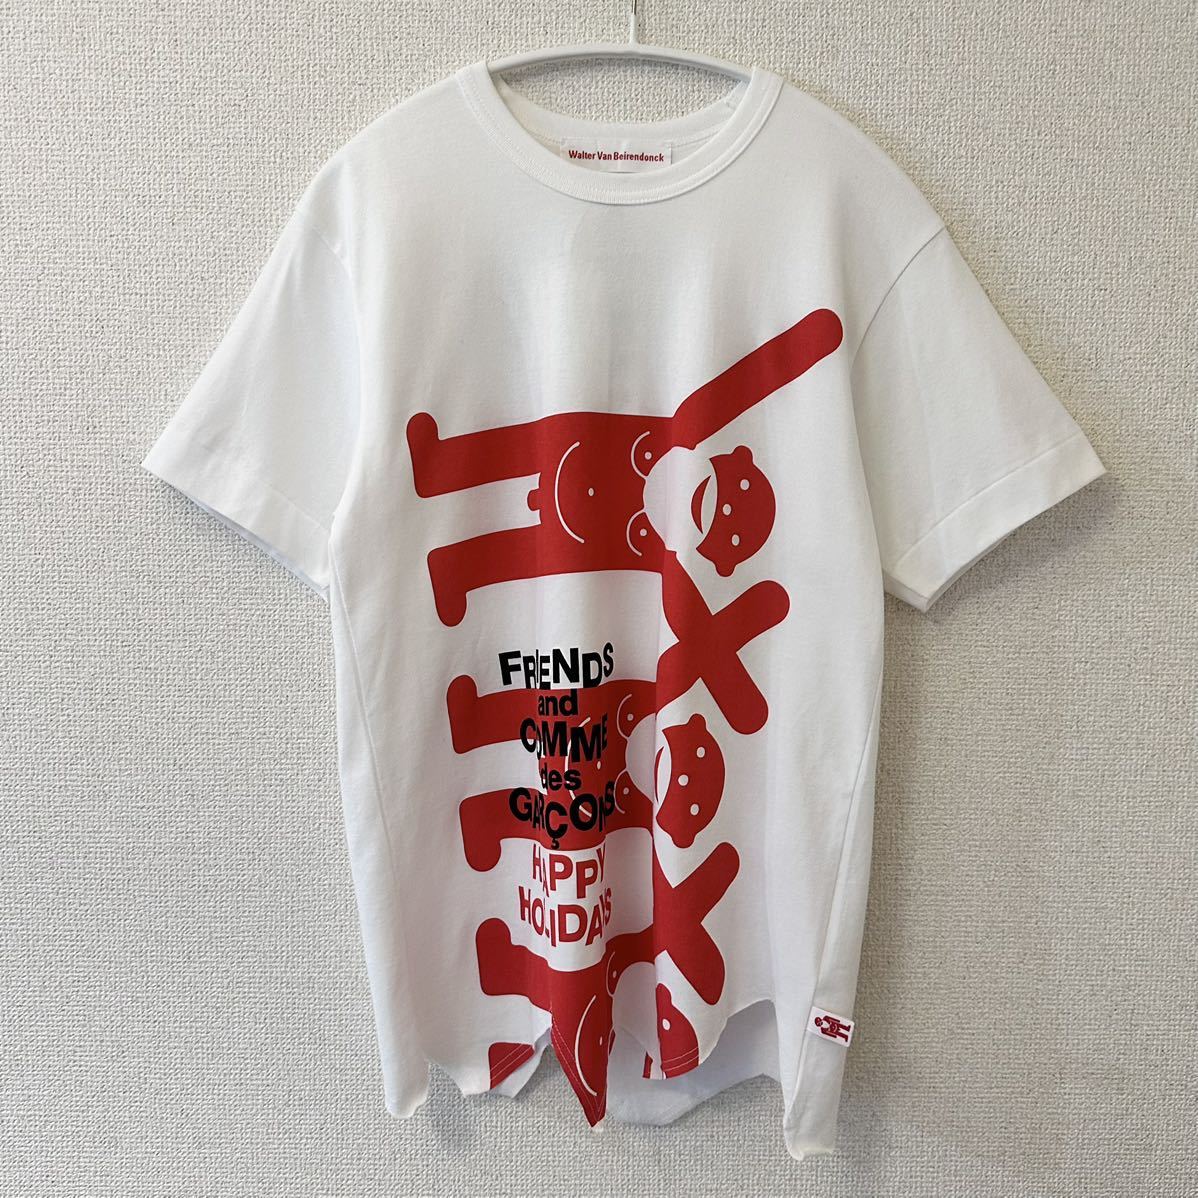 AW18 Walter Van Beirendonck × COMME des GARCONSハッピーホリデー Tシャツ w< ウォルター